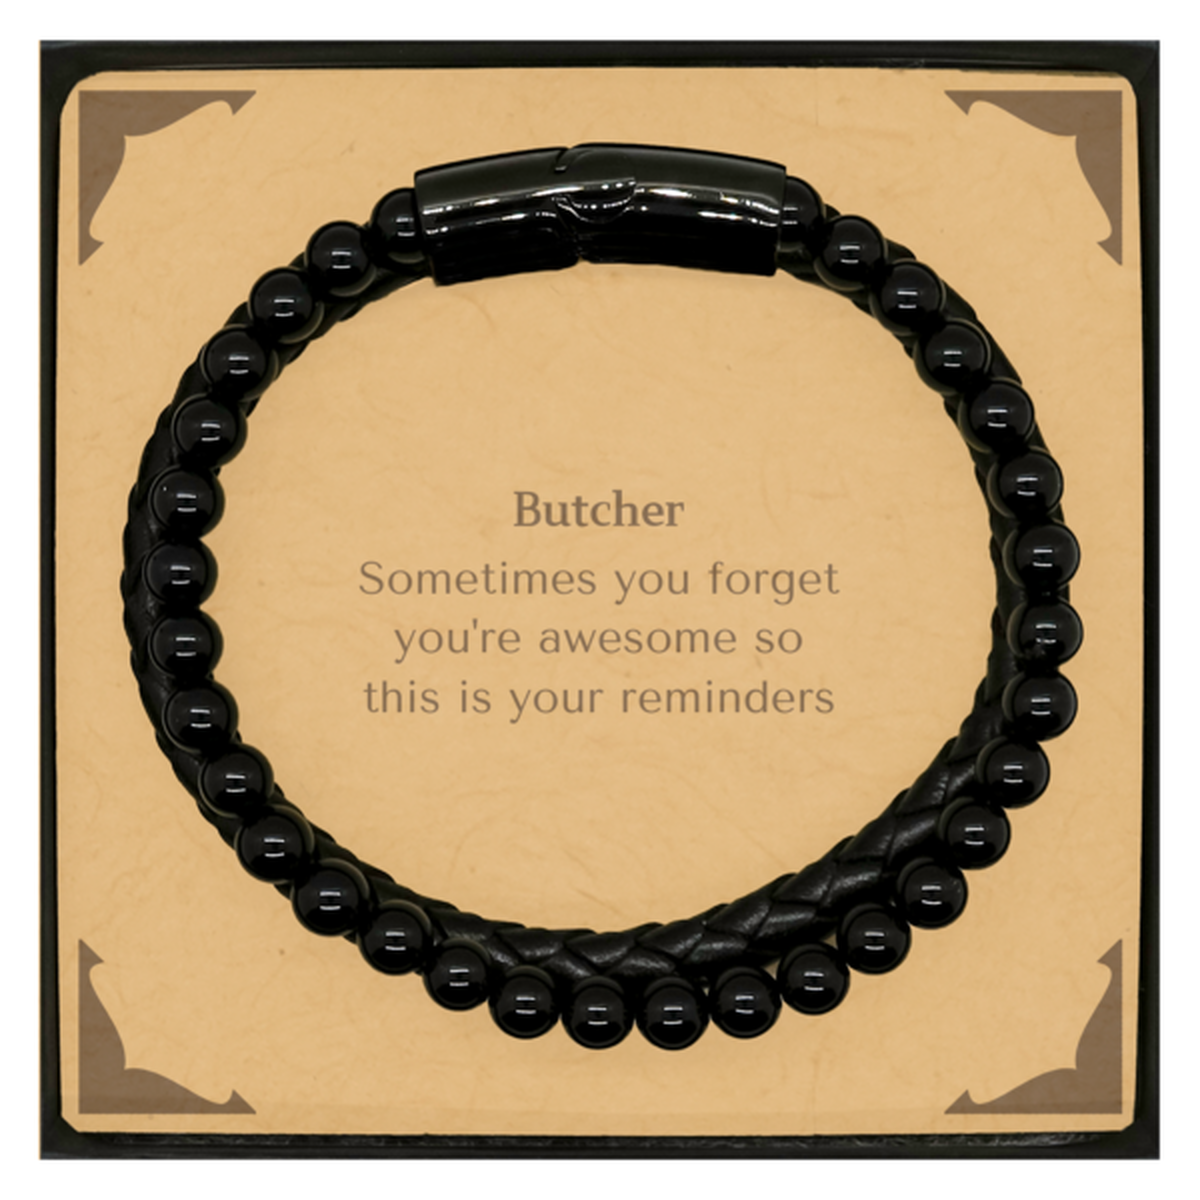 Sentimental Butcher Stone Leather Bracelets, Butcher Sometimes you forget you're awesome so this is your reminders, Graduation Christmas Birthday Gifts for Butcher, Men, Women, Coworkers